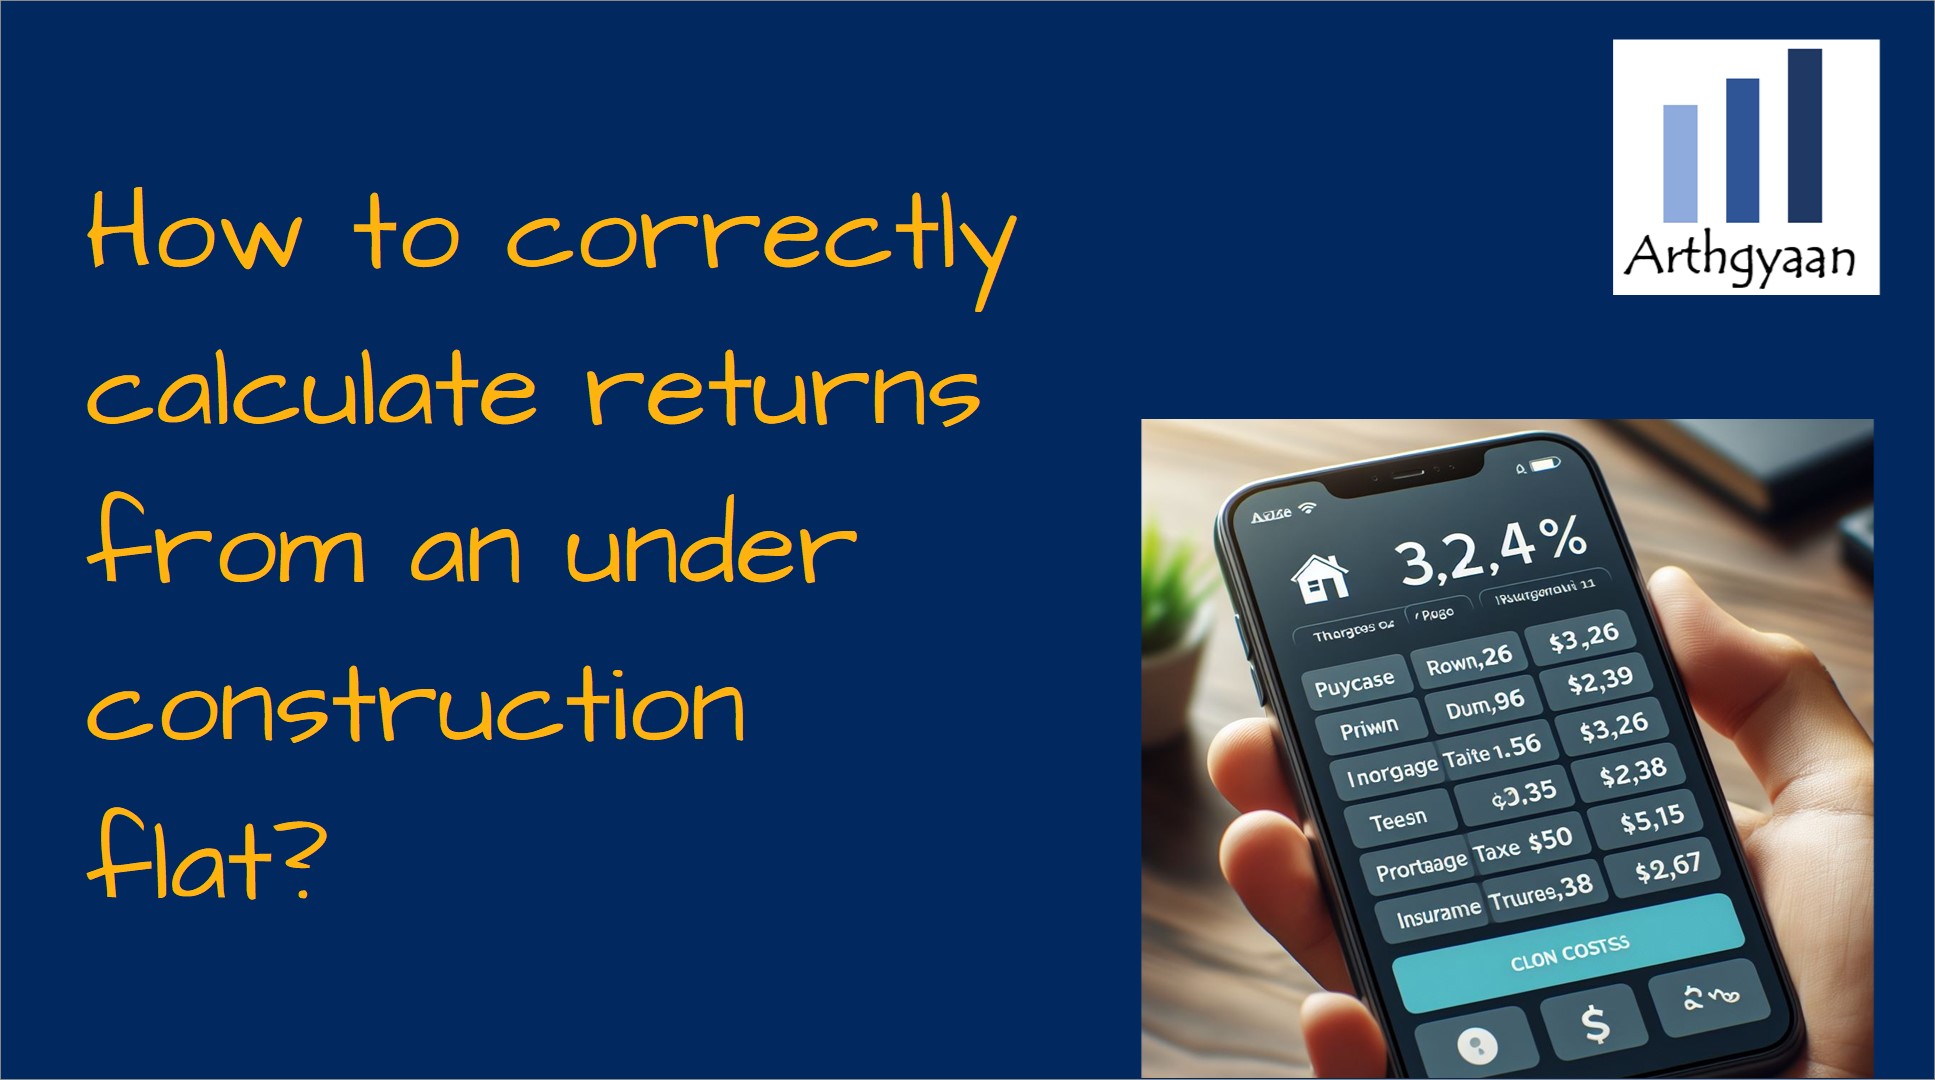 How to correctly calculate returns from an under construction flat?